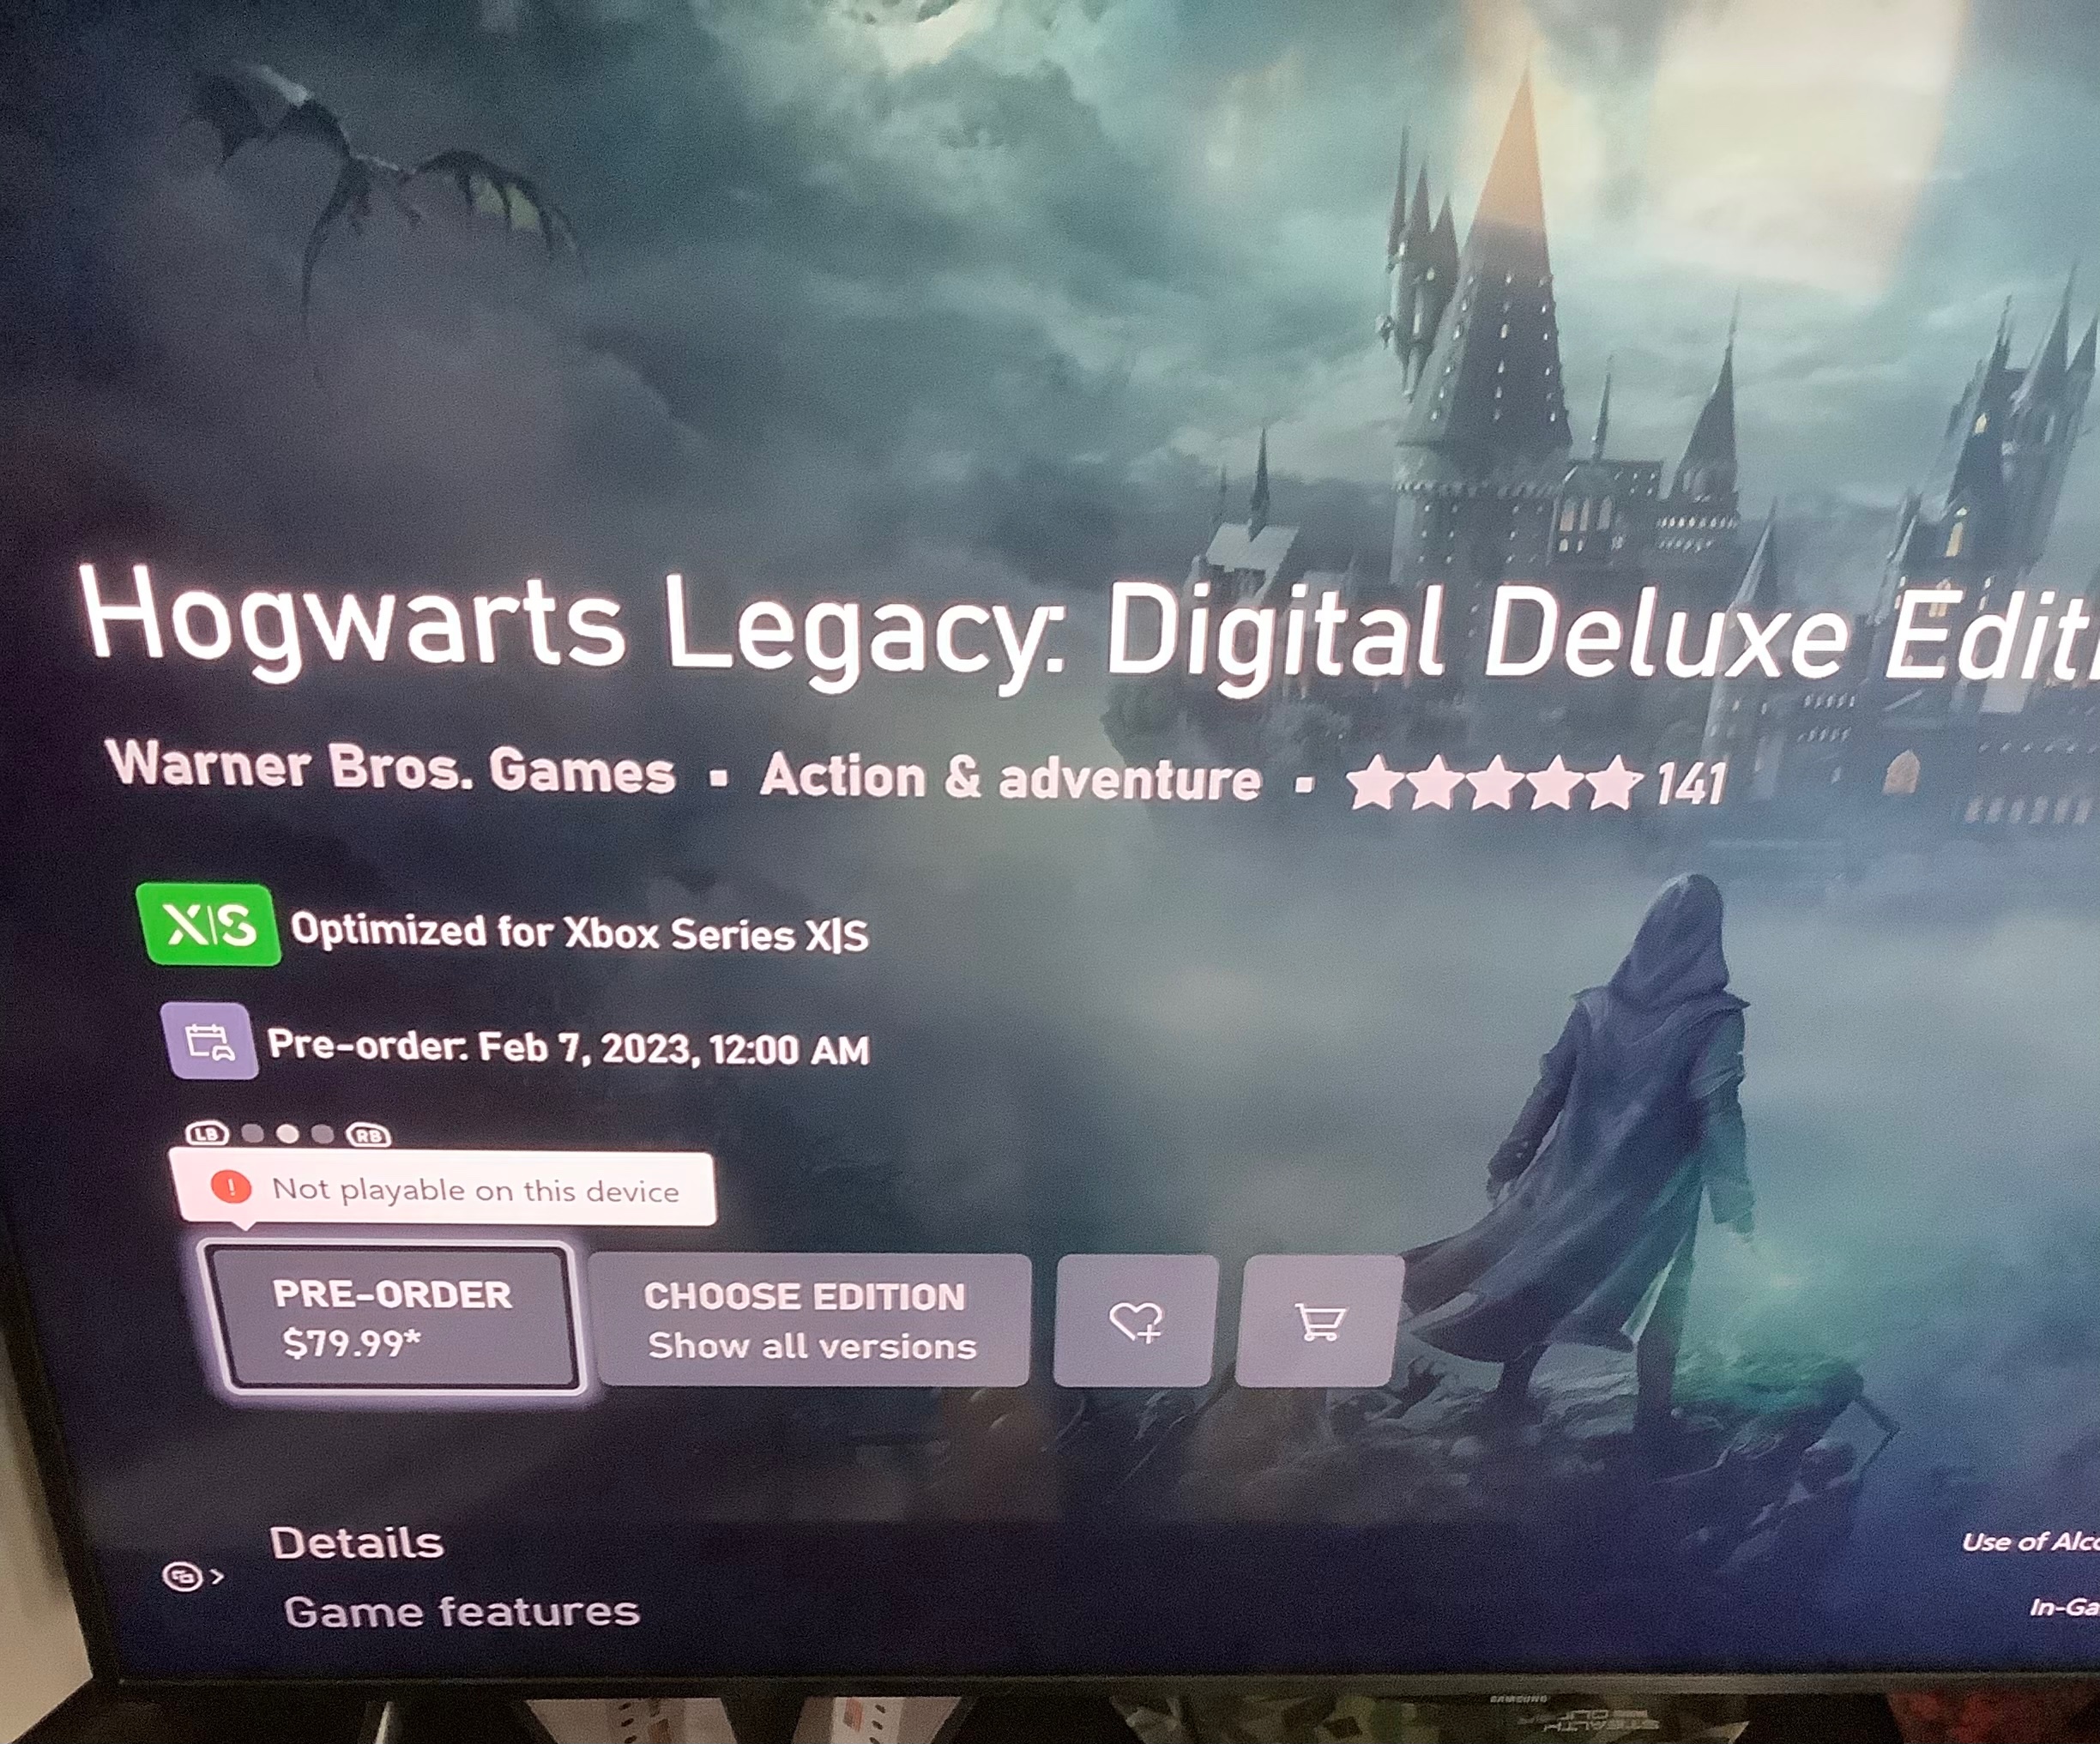 Not playable on this device? - Microsoft Community